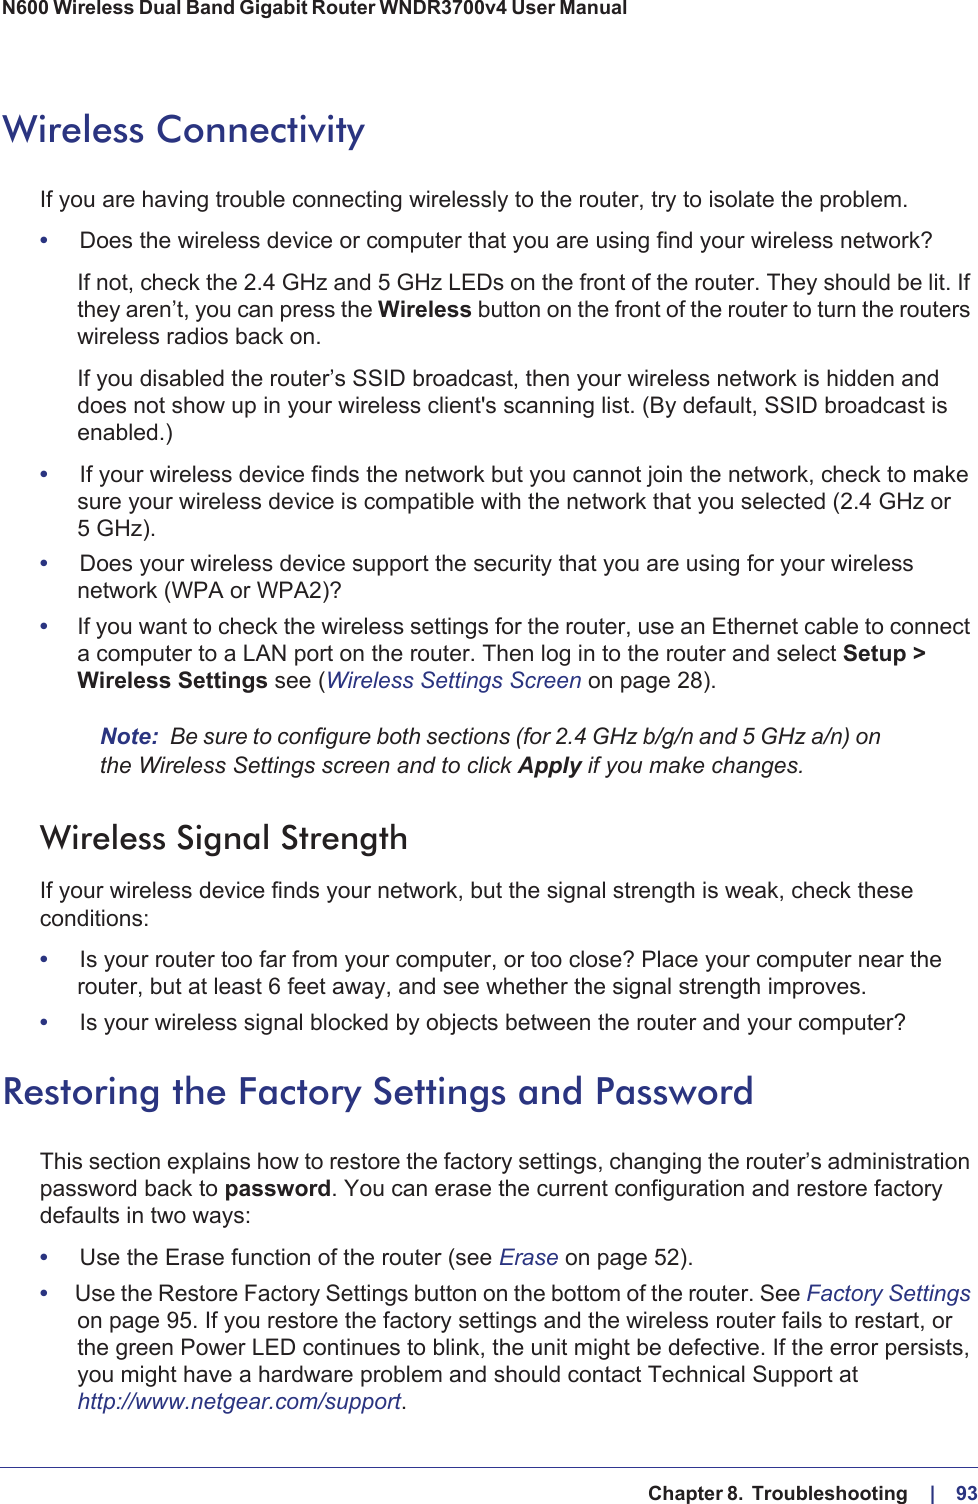   Chapter 8.  Troubleshooting     |    93N600 Wireless Dual Band Gigabit Router WNDR3700v4 User Manual Wireless ConnectivityIf you are having trouble connecting wirelessly to the router, try to isolate the problem. •Does the wireless device or computer that you are using find your wireless network?If not, check the 2.4 GHz and 5 GHz LEDs on the front of the router. They should be lit. If they aren’t, you can press the Wireless button on the front of the router to turn the routers wireless radios back on.If you disabled the router’s SSID broadcast, then your wireless network is hidden and does not show up in your wireless client&apos;s scanning list. (By default, SSID broadcast is enabled.)•If your wireless device finds the network but you cannot join the network, check to make sure your wireless device is compatible with the network that you selected (2.4 GHz or 5  GHz). •Does your wireless device support the security that you are using for your wireless network (WPA or WPA2)?•If you want to check the wireless settings for the router, use an Ethernet cable to connect a computer to a LAN port on the router. Then log in to the router and select Setup &gt; Wireless Settings see (Wireless Settings Screen on page  28). Note: Be sure to configure both sections (for 2.4 GHz b/g/n and 5 GHz a/n) on the Wireless Settings screen and to click Apply if you make changes.Wireless Signal StrengthIf your wireless device finds your network, but the signal strength is weak, check these conditions:•Is your router too far from your computer, or too close? Place your computer near the router, but at least 6 feet away, and see whether the signal strength improves.•Is your wireless signal blocked by objects between the router and your computer?Restoring the Factory Settings and PasswordThis section explains how to restore the factory settings, changing the router’s administration password back to password. You can erase the current configuration and restore factory defaults in two ways:•Use the Erase function of the router (see Erase on page  52).•Use the Restore Factory Settings button on the bottom of the router. See Factory Settings on page  95. If you restore the factory settings and the wireless router fails to restart, or the green Power LED continues to blink, the unit might be defective. If the error persists, you might have a hardware problem and should contact Technical Support at http://www.netgear.com/support.